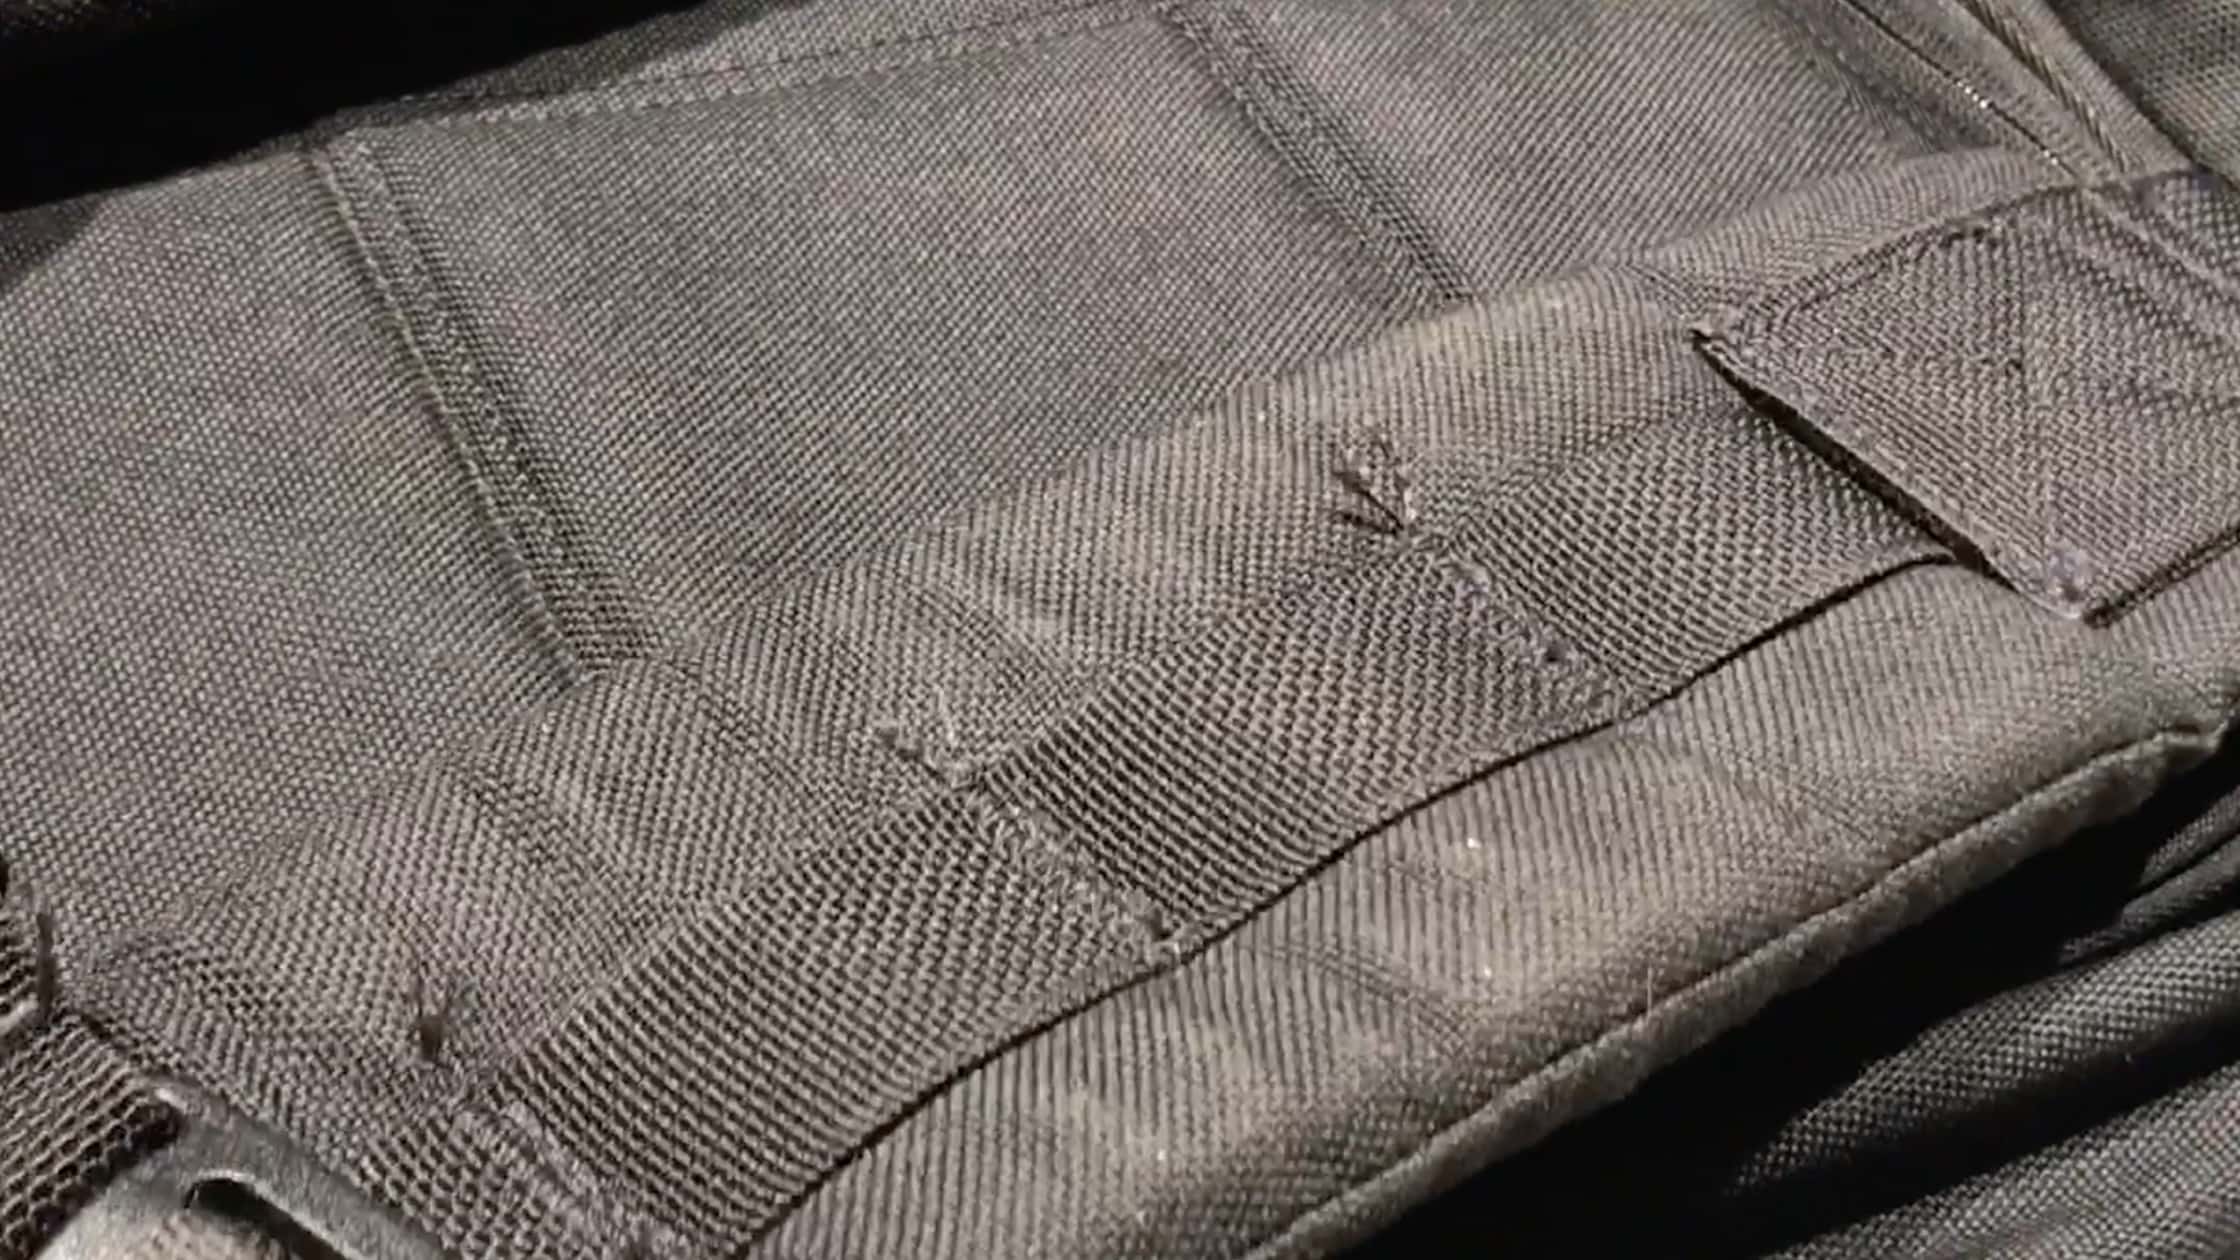 Frayed areas on the GORUCK GR2